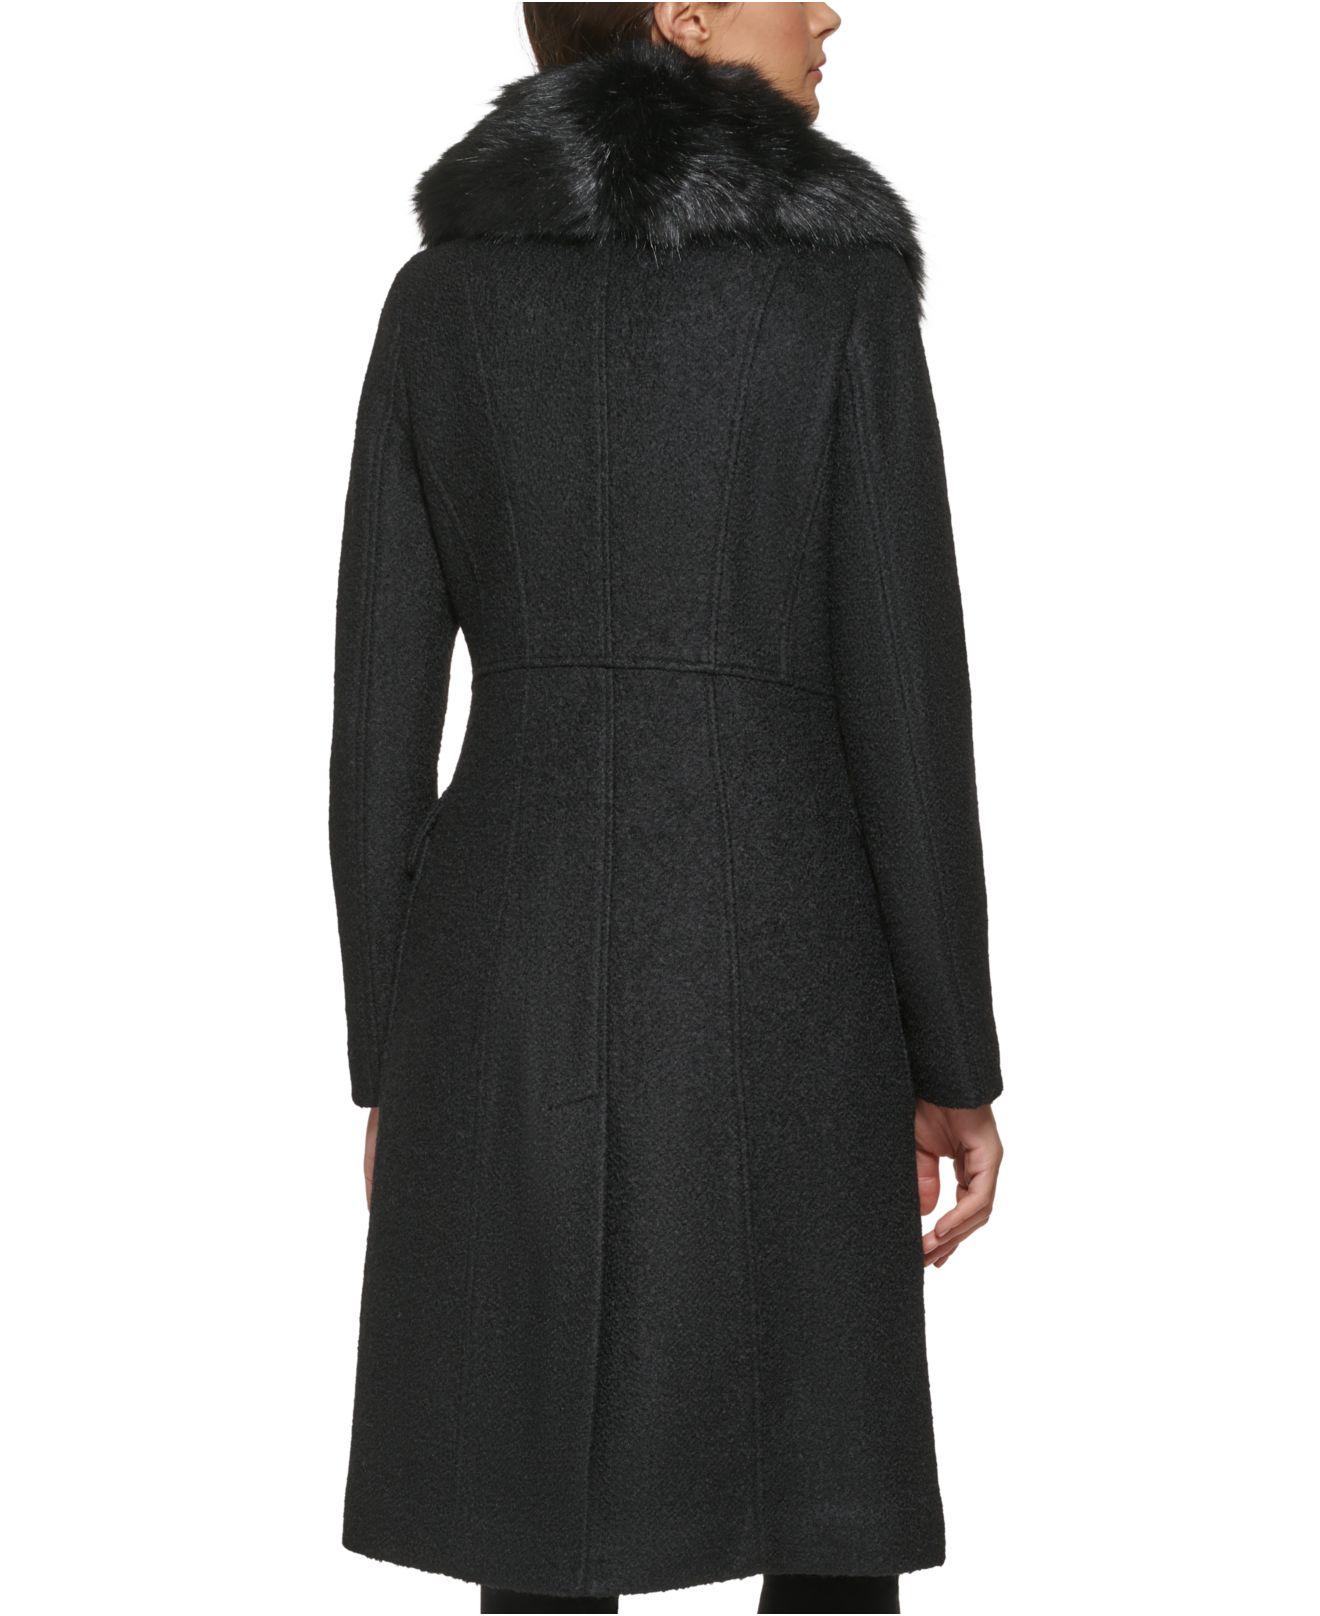 Guess Faux-fur Collar Double-breasted Walker Coat in Black | Lyst